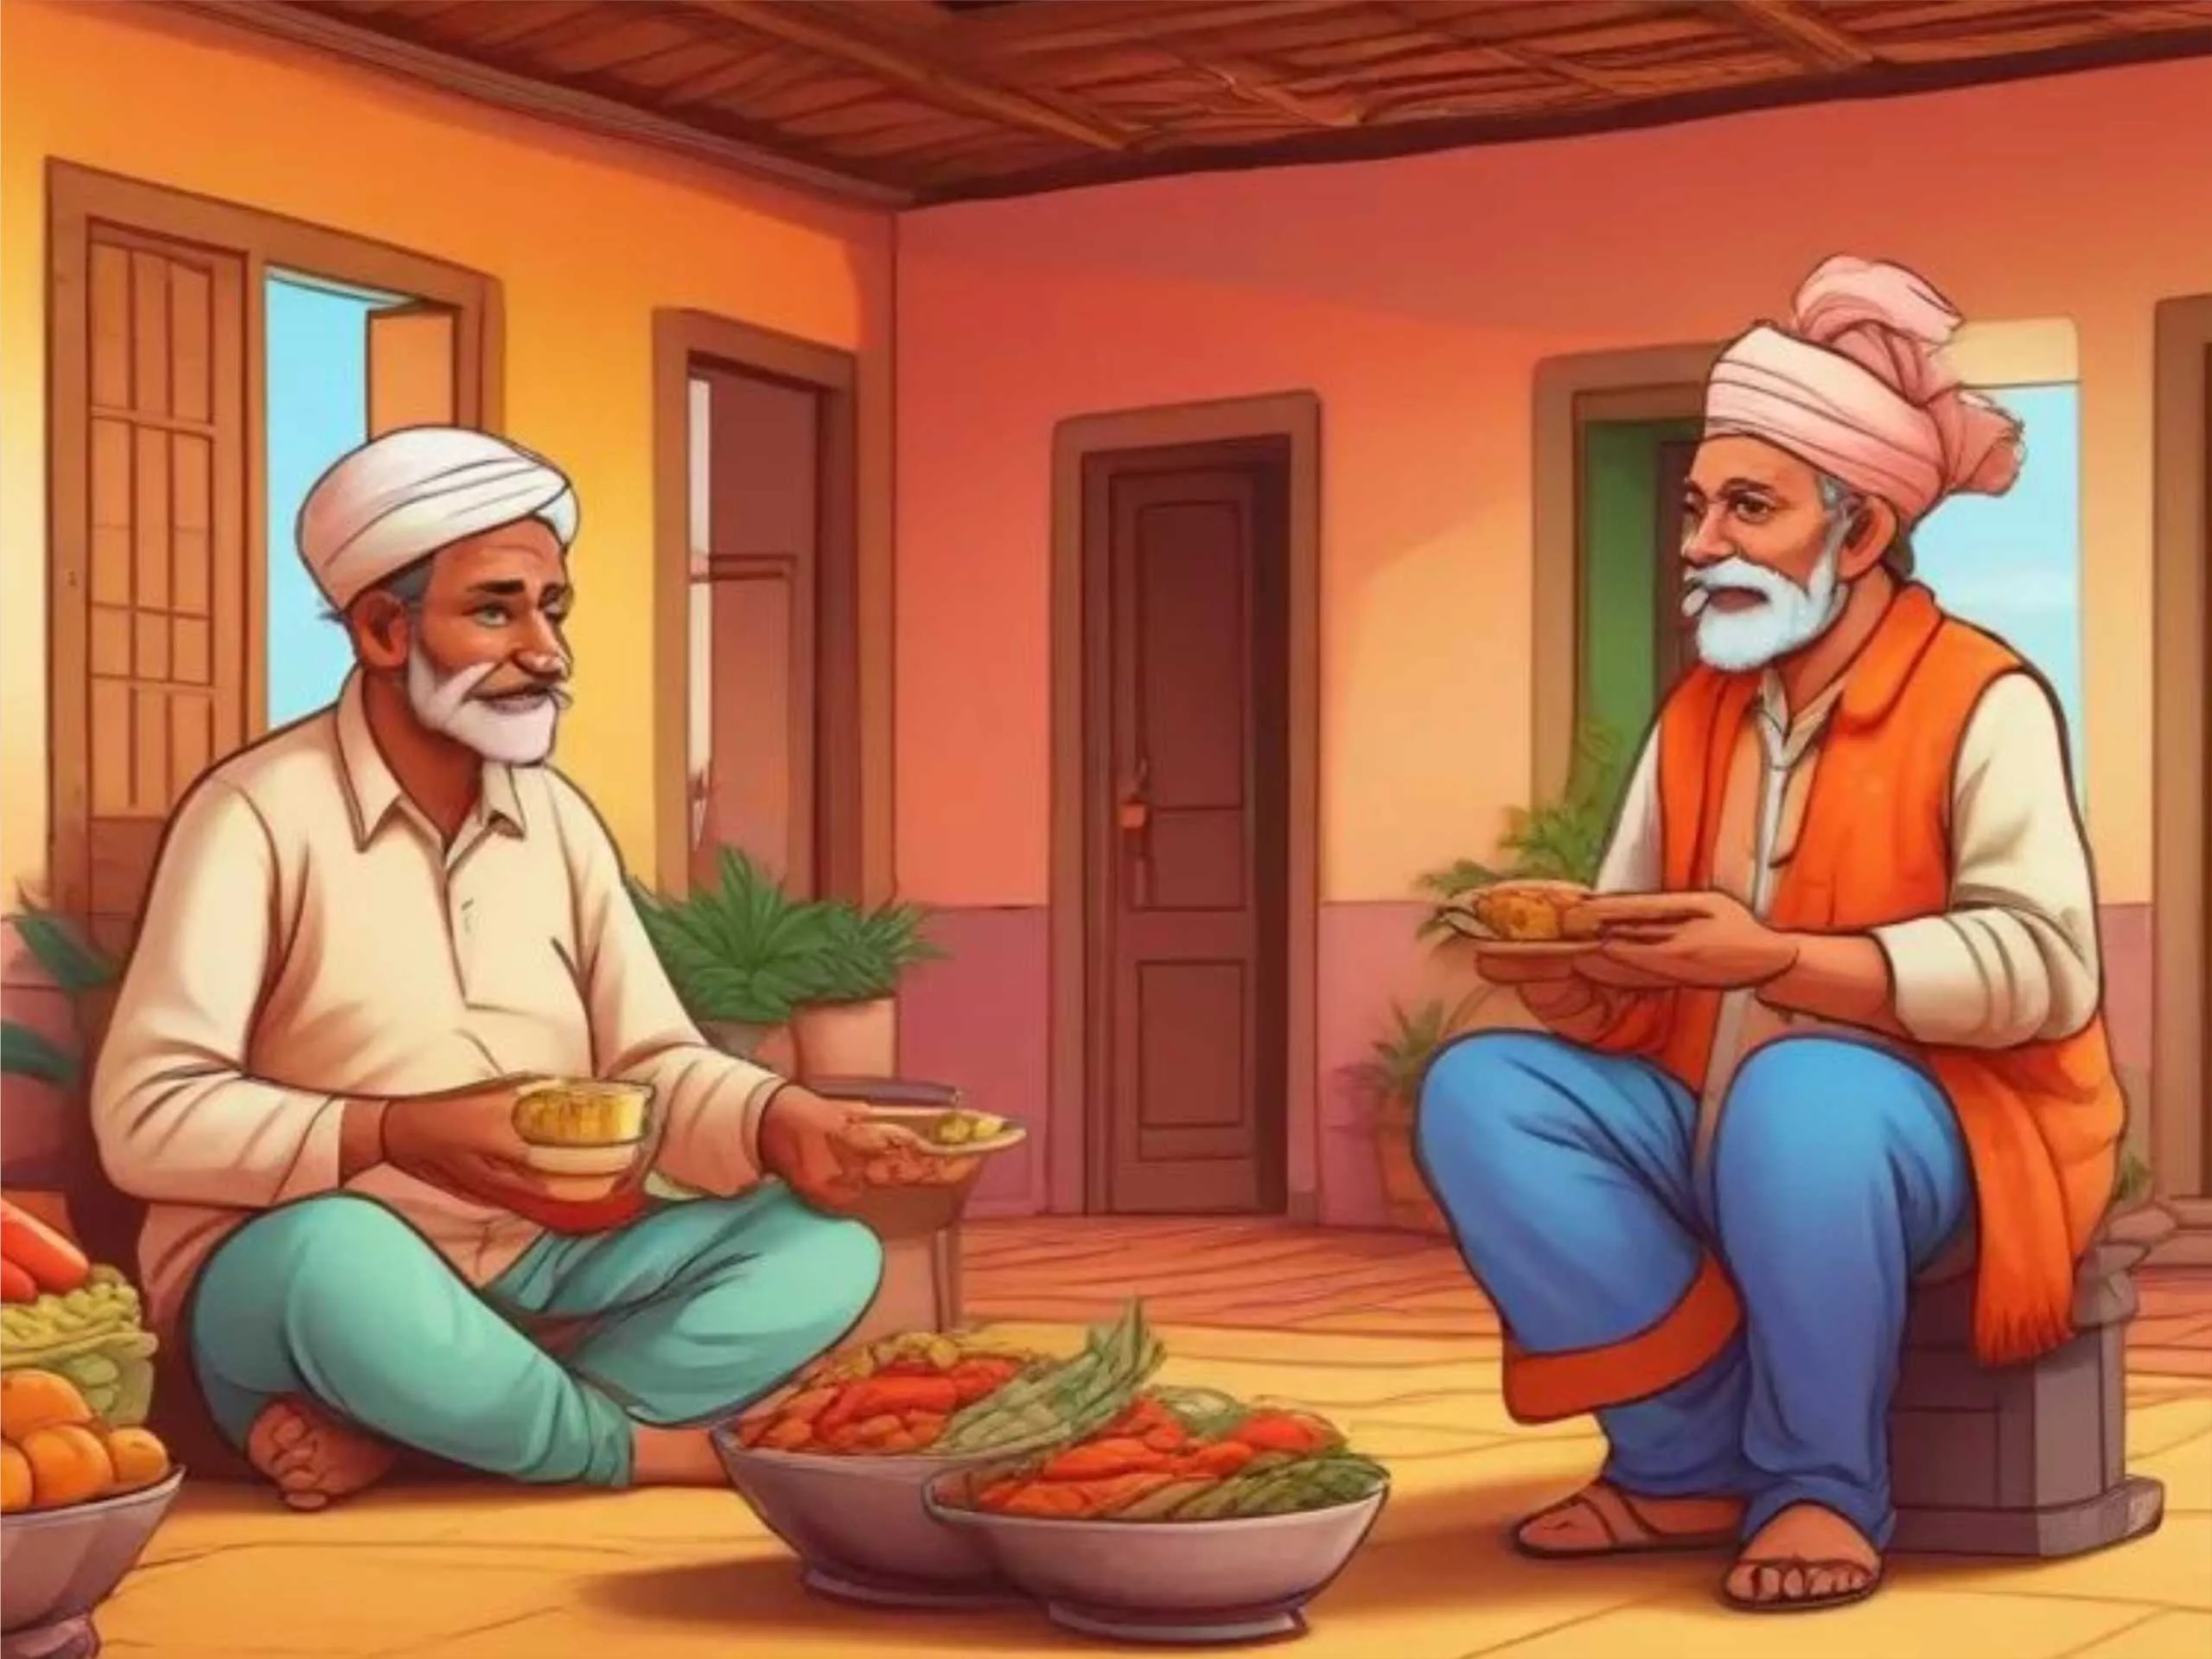 cartoon image of a farmer eating food with landlord